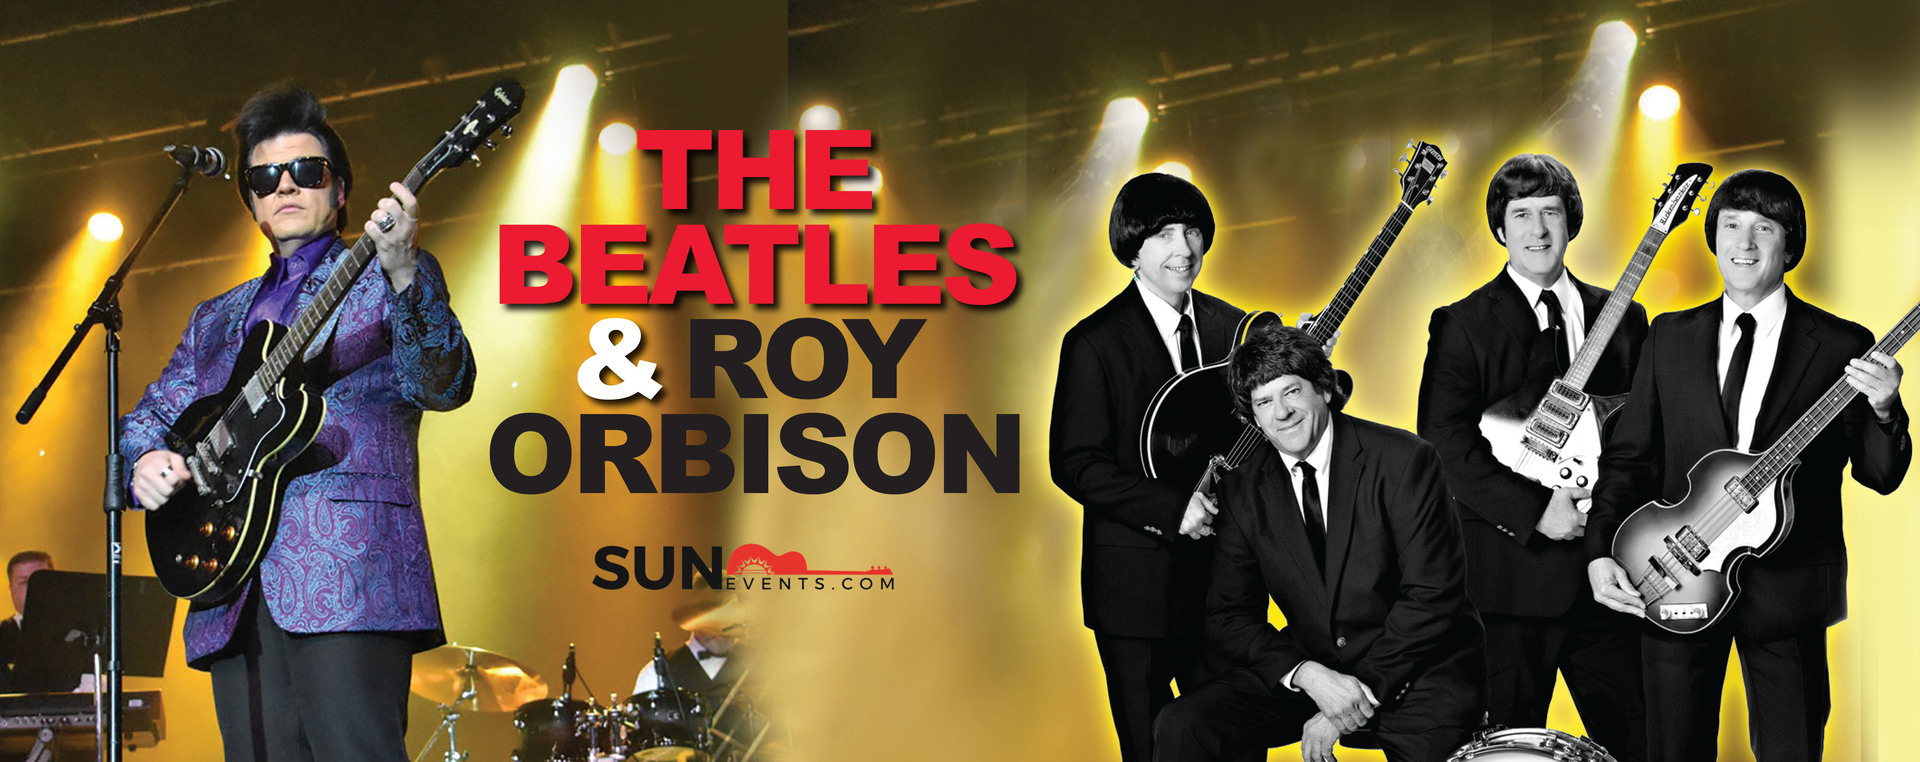 Legends of Rock: The Beatles and Roy Orbison Tribute, Lake Placid, Florida, United States